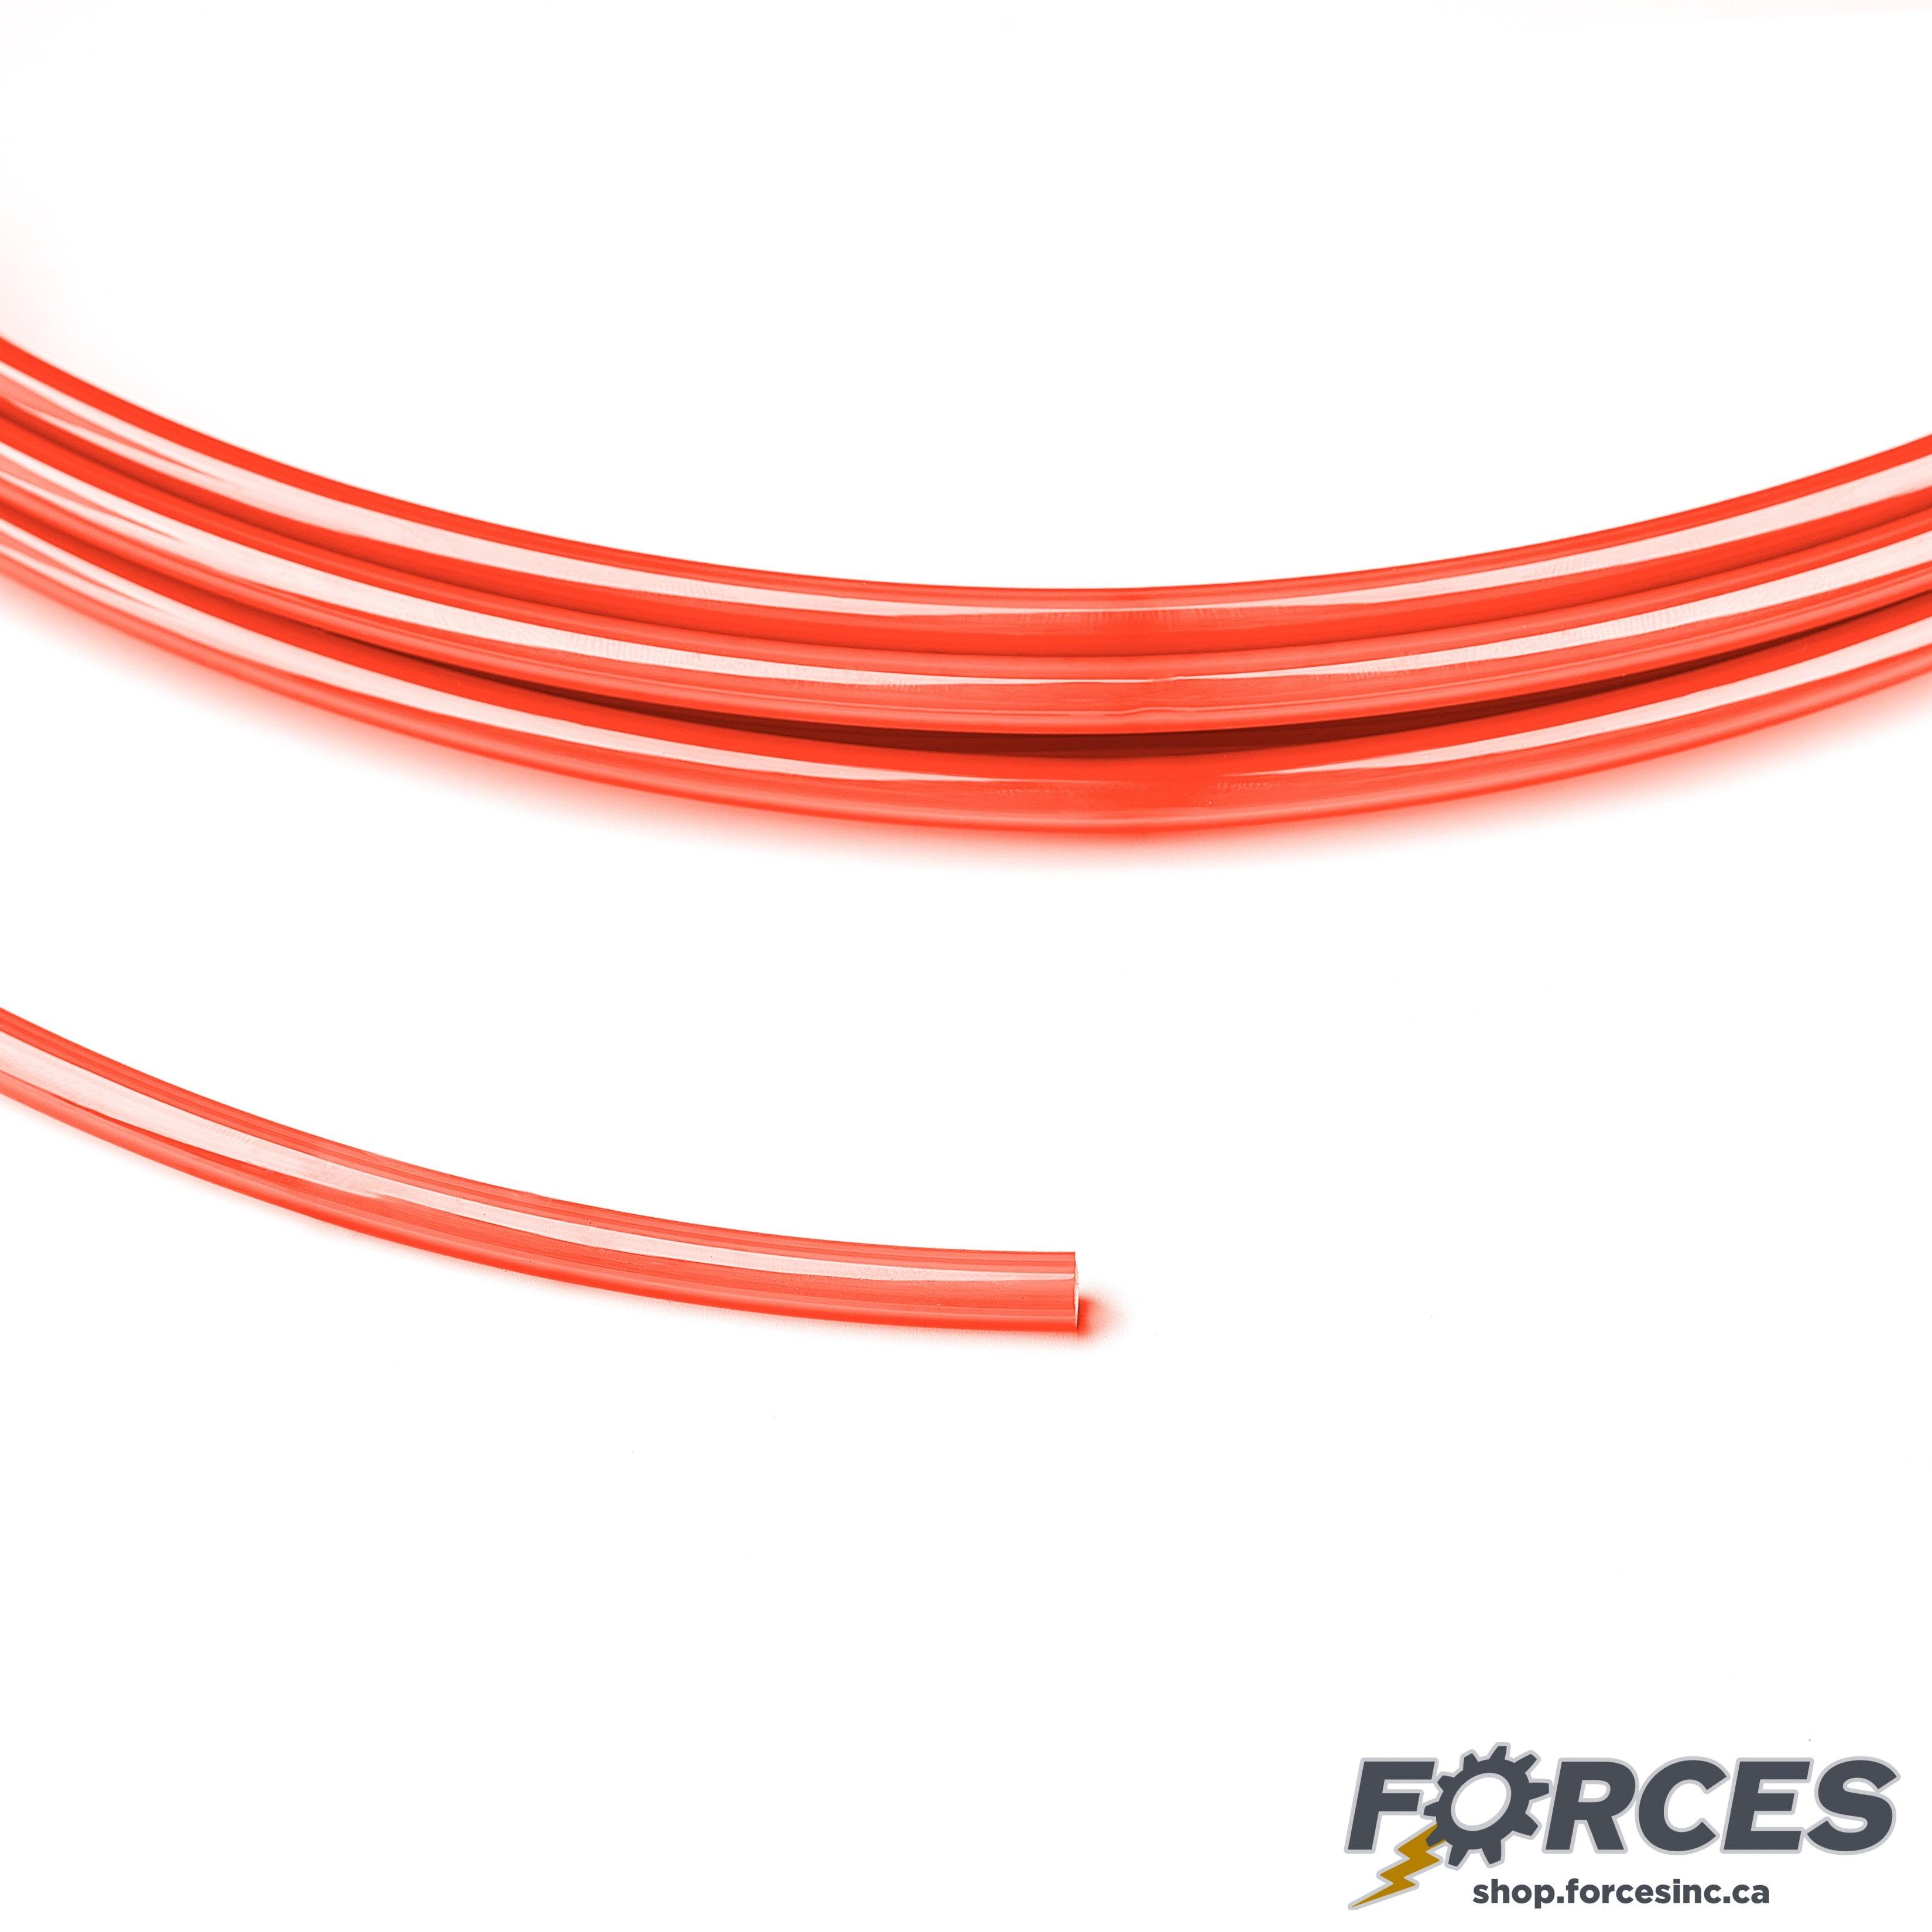 Pneumatic Air Tubing 16mm x 11mm Red Polyurethane - 165ft - Forces Inc